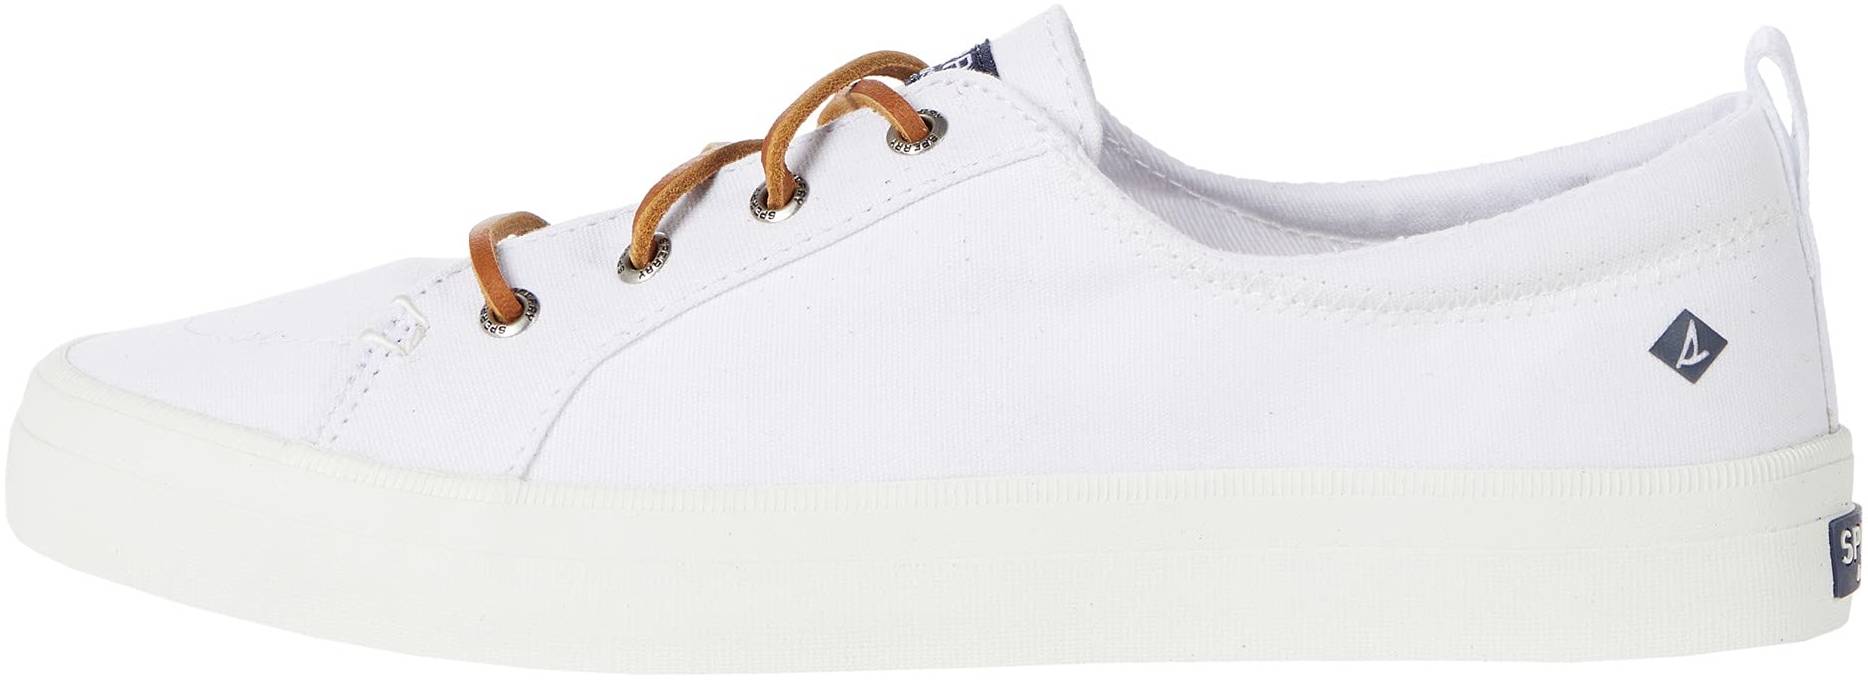 Sperry Top-Sider Womens Crest Vibe Sneaker